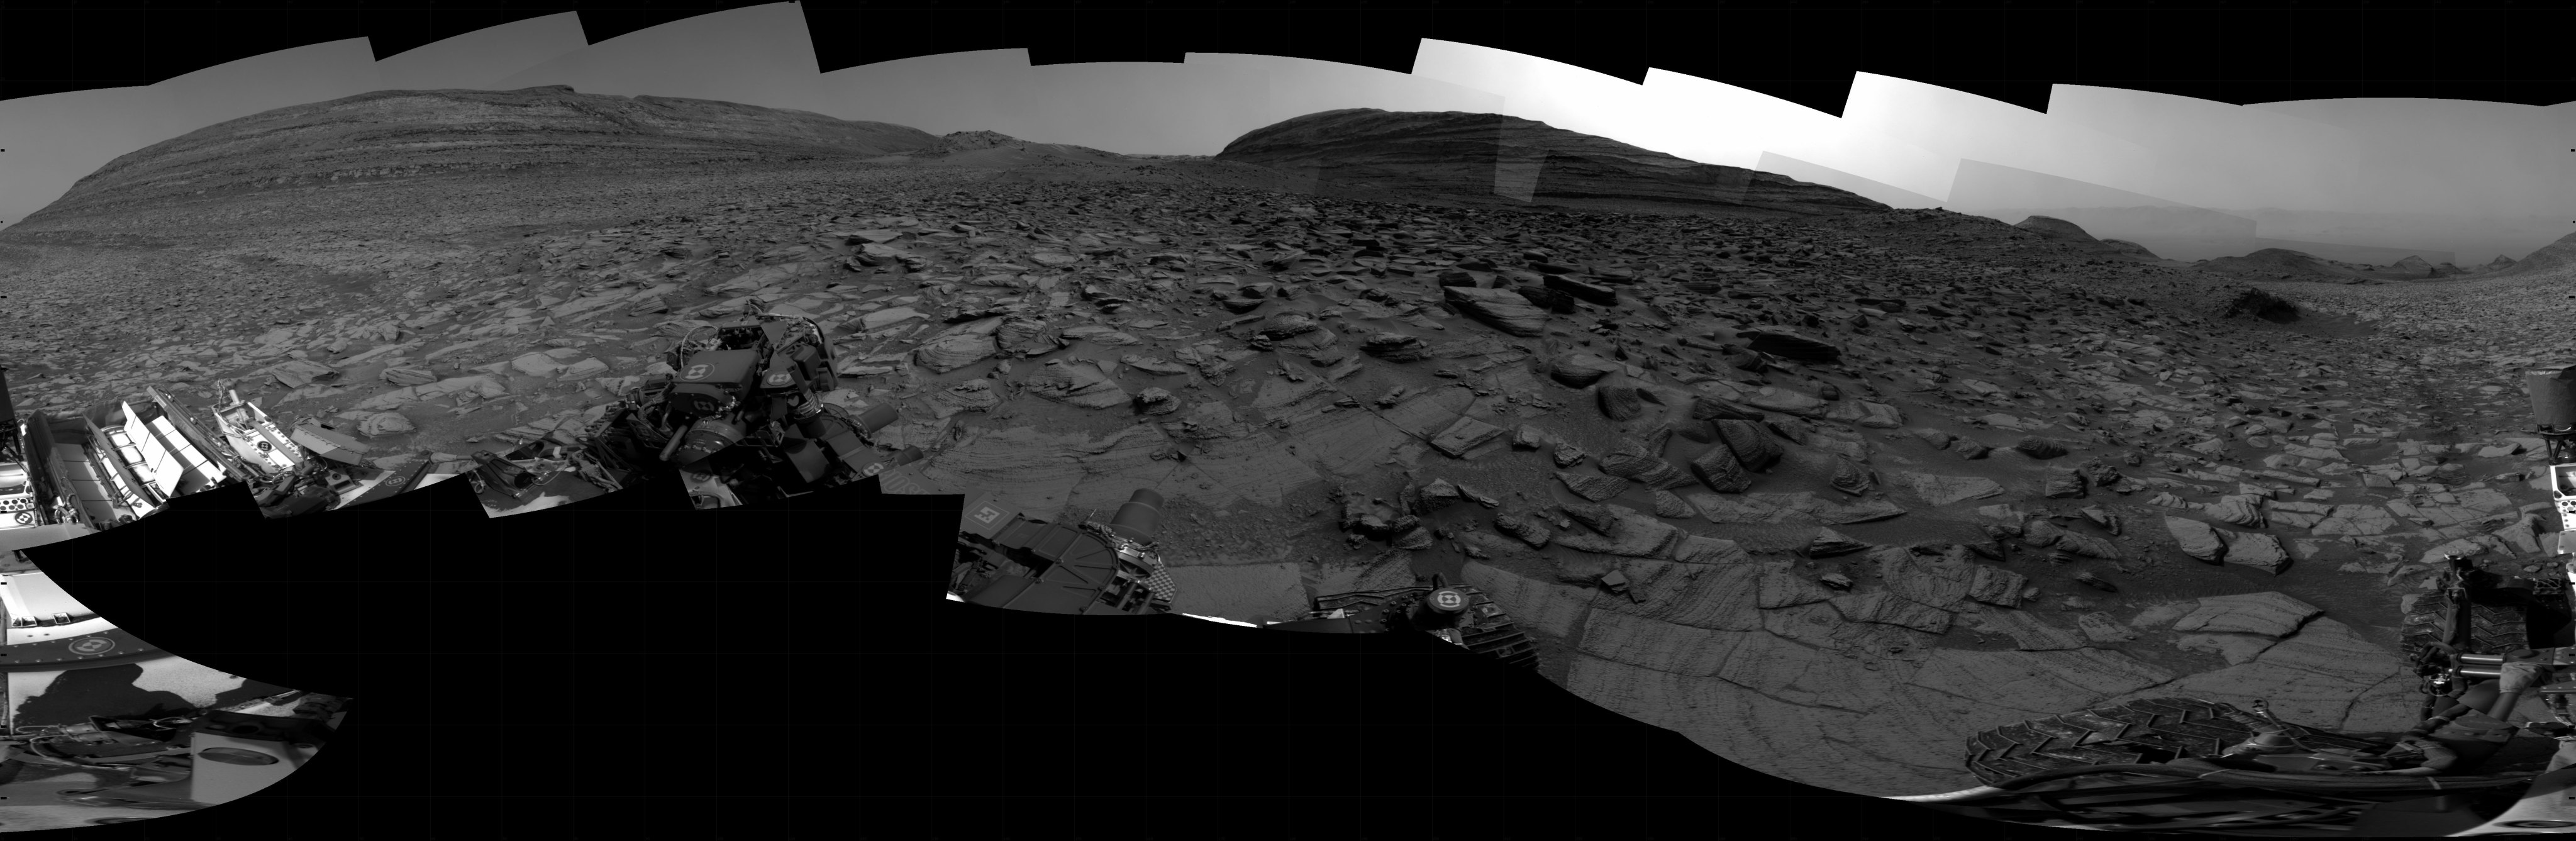 NASA's Mars rover Curiosity took 31 images in Gale Crater using its mast-mounted Right Navigation Camera (Navcam) to create this mosaic. The seam-corrected mosaic provides a 360-degree cylindrical projection panorama of the Martian surface centered at 180 degrees azimuth (measured clockwise from north).